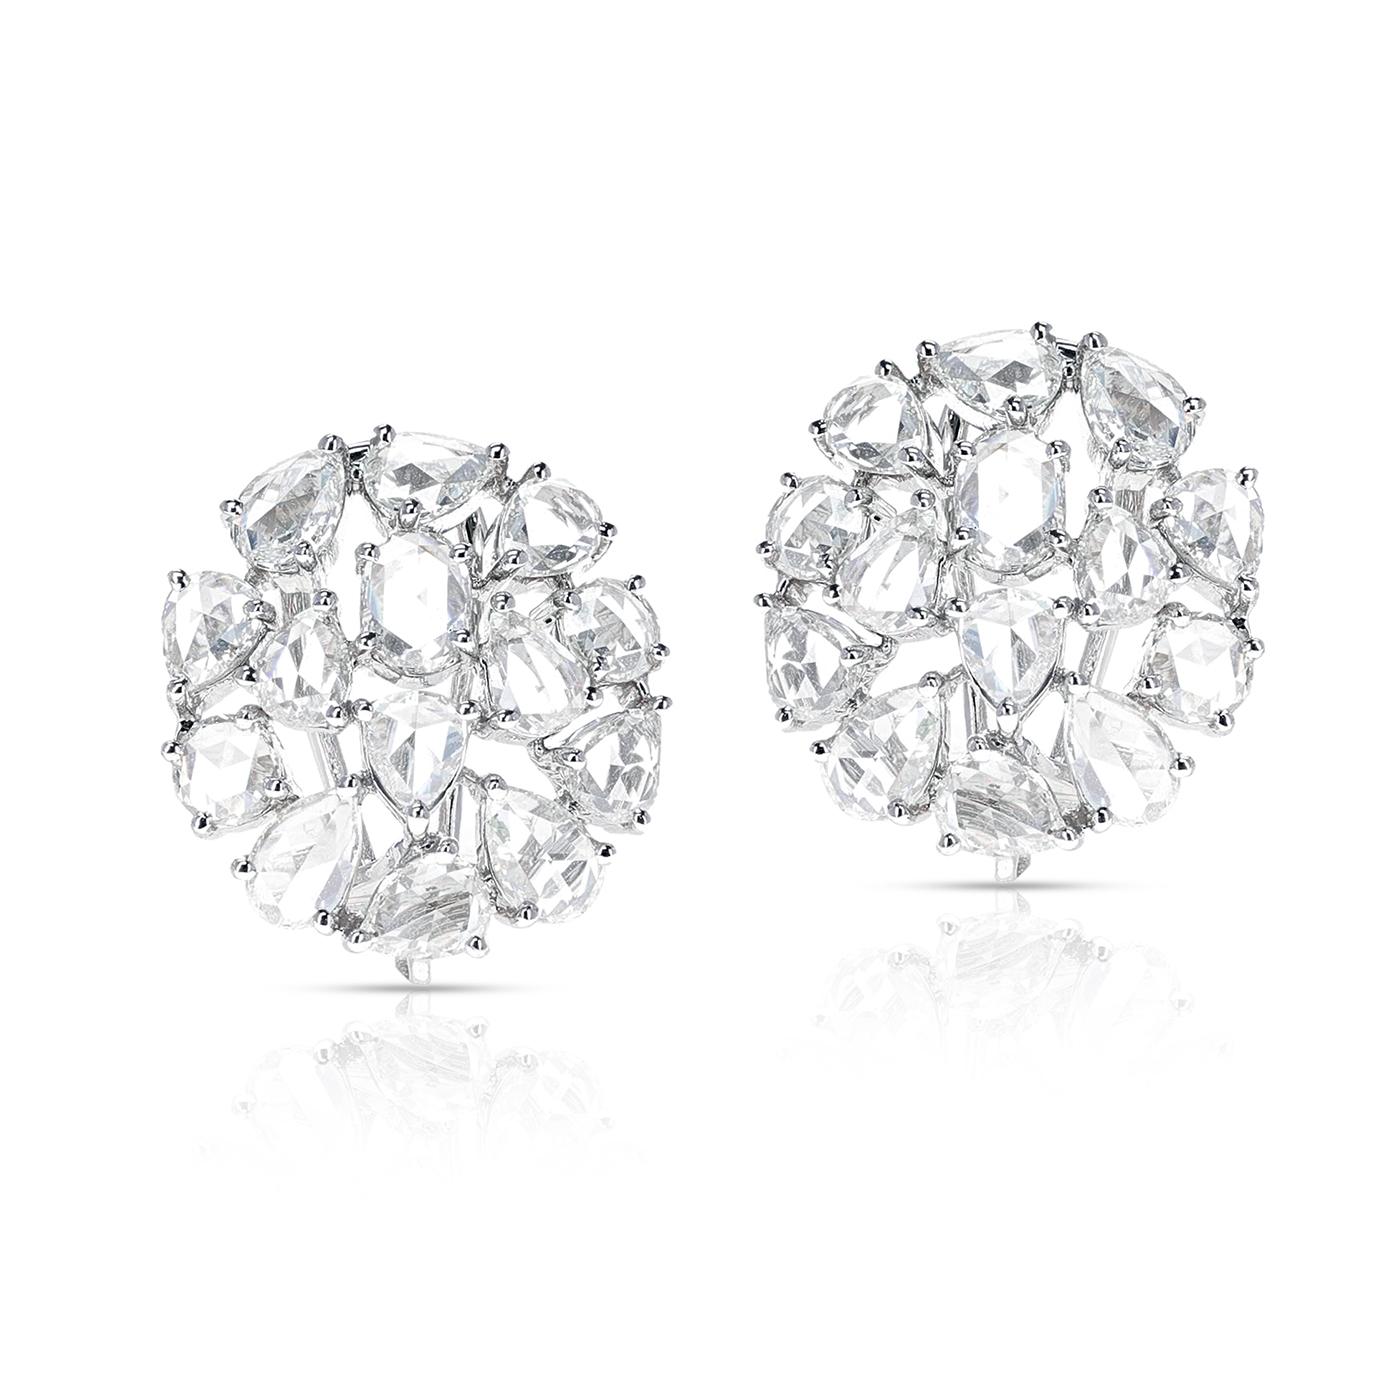 A stunning pair of Diamond Rose Cut Earrings, with 5.87 carats of Diamonds, made in 18k White Gold. The total weight of the earrings 10.33 grams. 